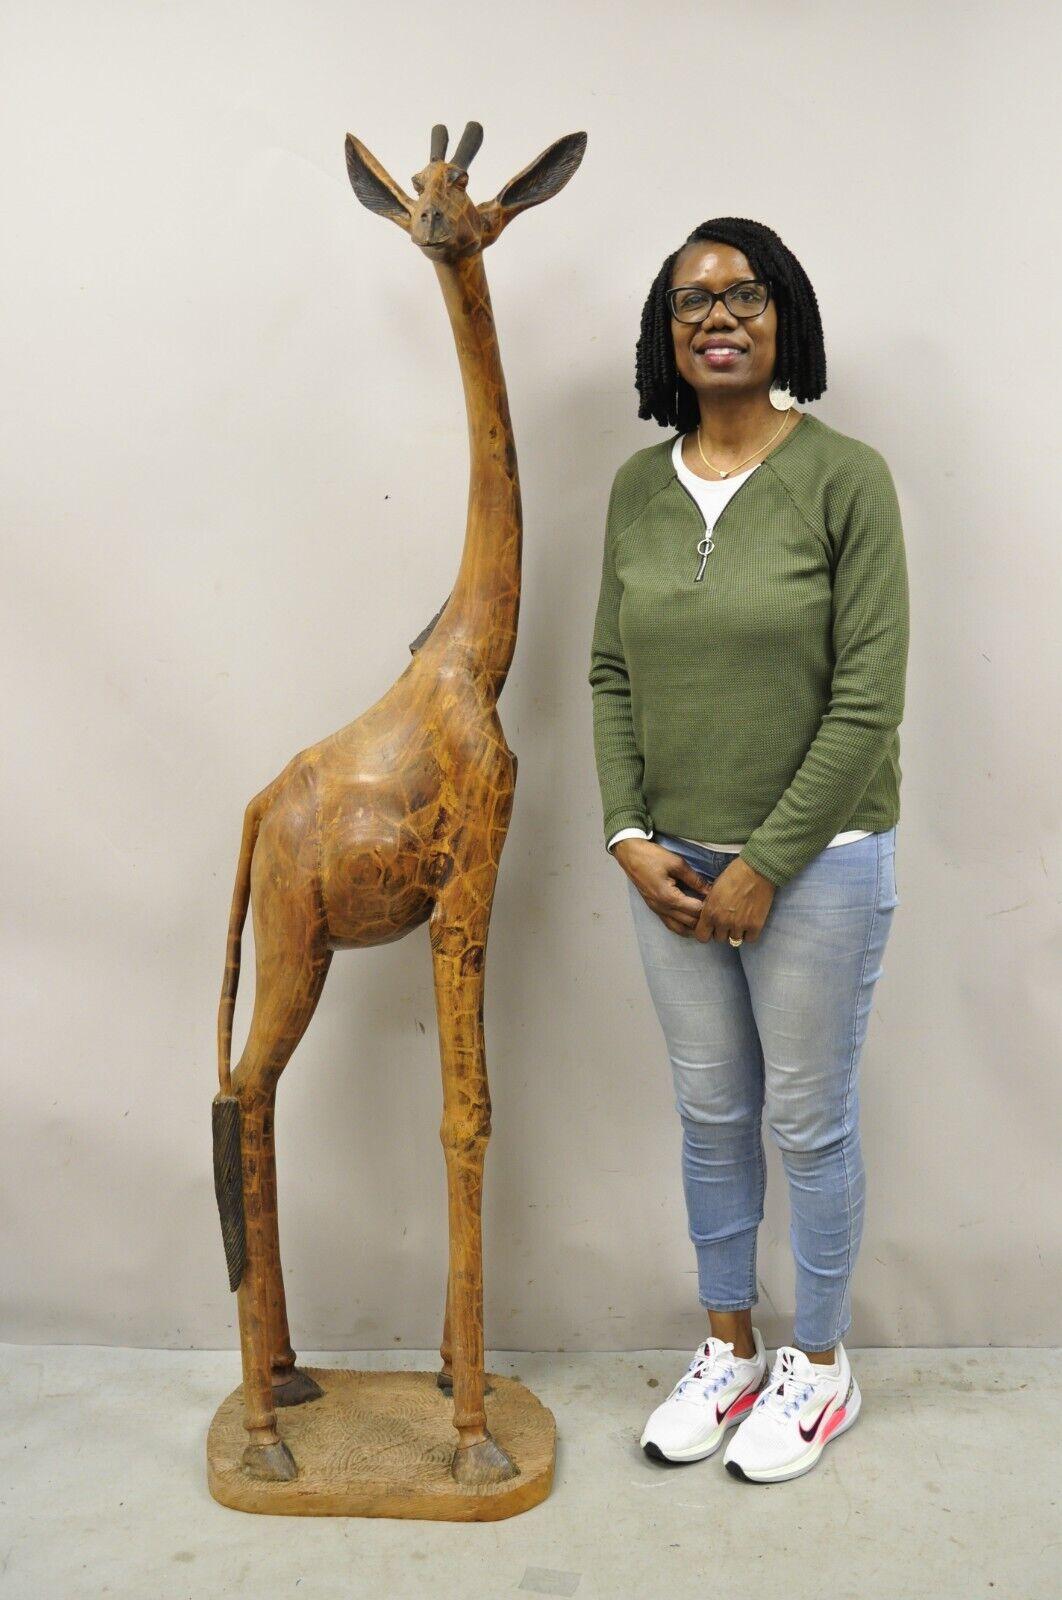 Vintage Solid Carved Wood 72” Tall African Safari Giraffe Statue Sculpture. Item features a heavy solid carved wood construction nicely carved details, large impressive size, signed 